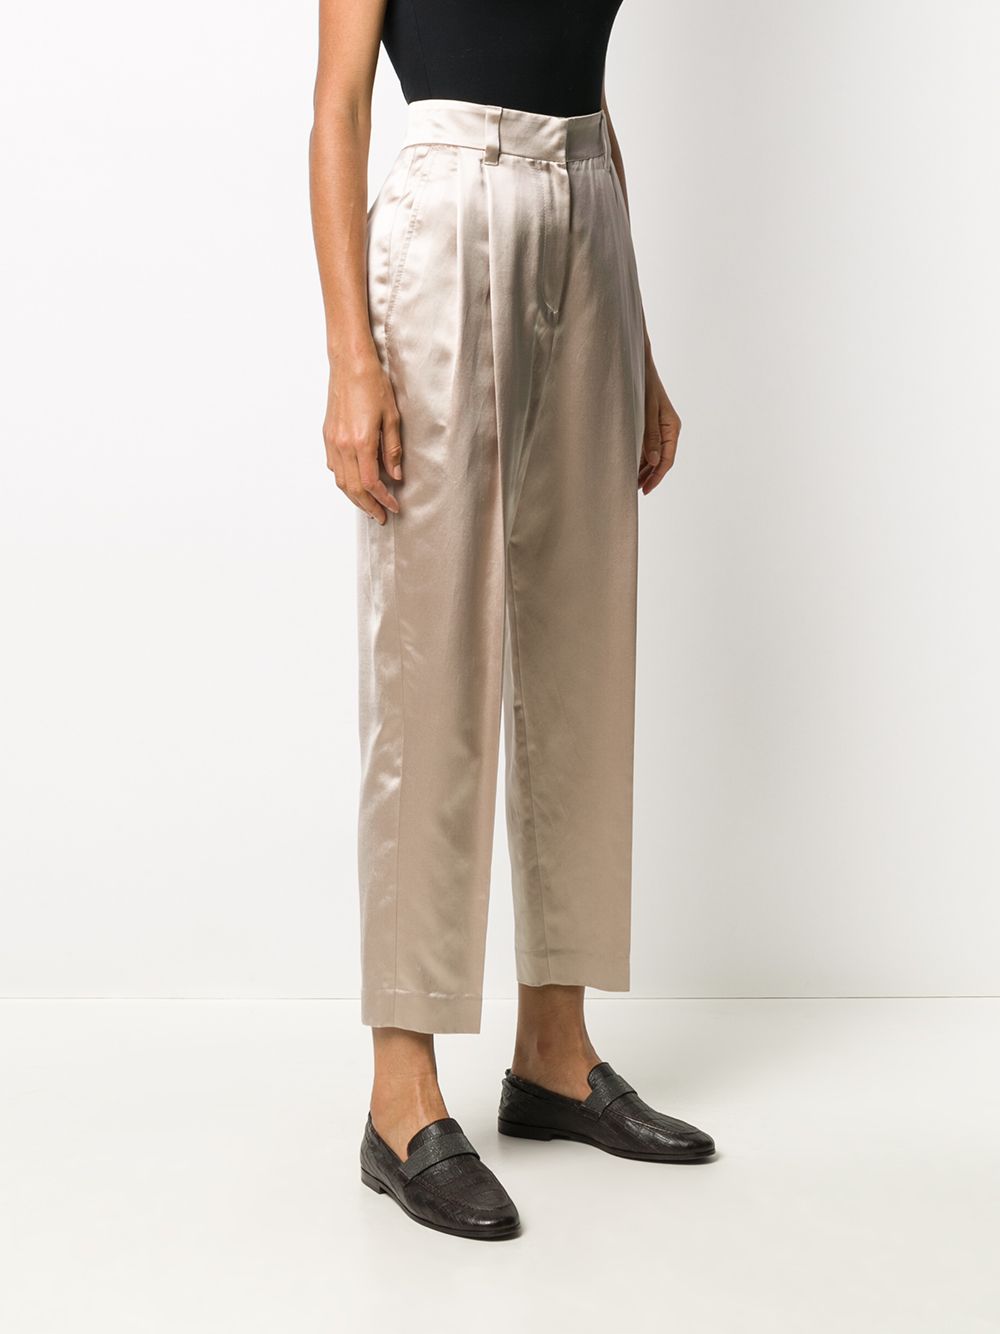 BRUNELLO CUCINELLI METALLIC HIGH-WAISTED TAPERED TROUSERS